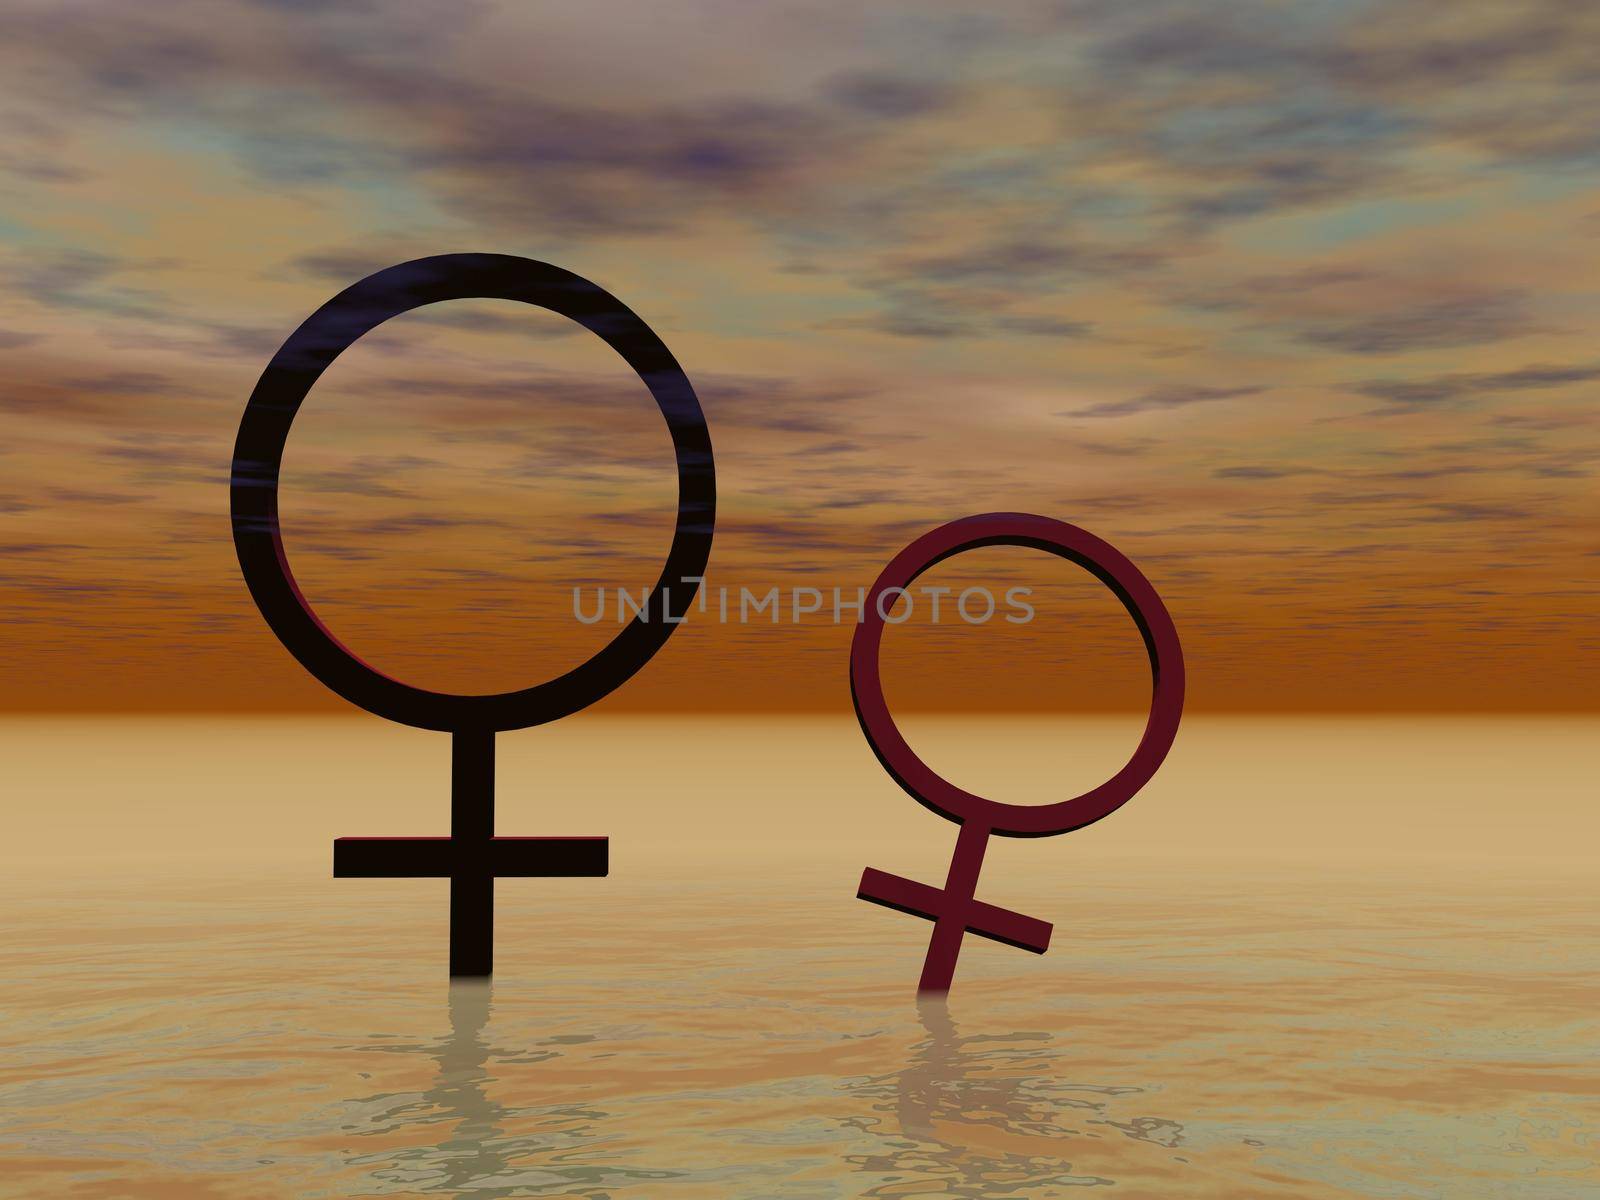 feminine symbol with a dream and meditation landscape - 3d rendering by mariephotos